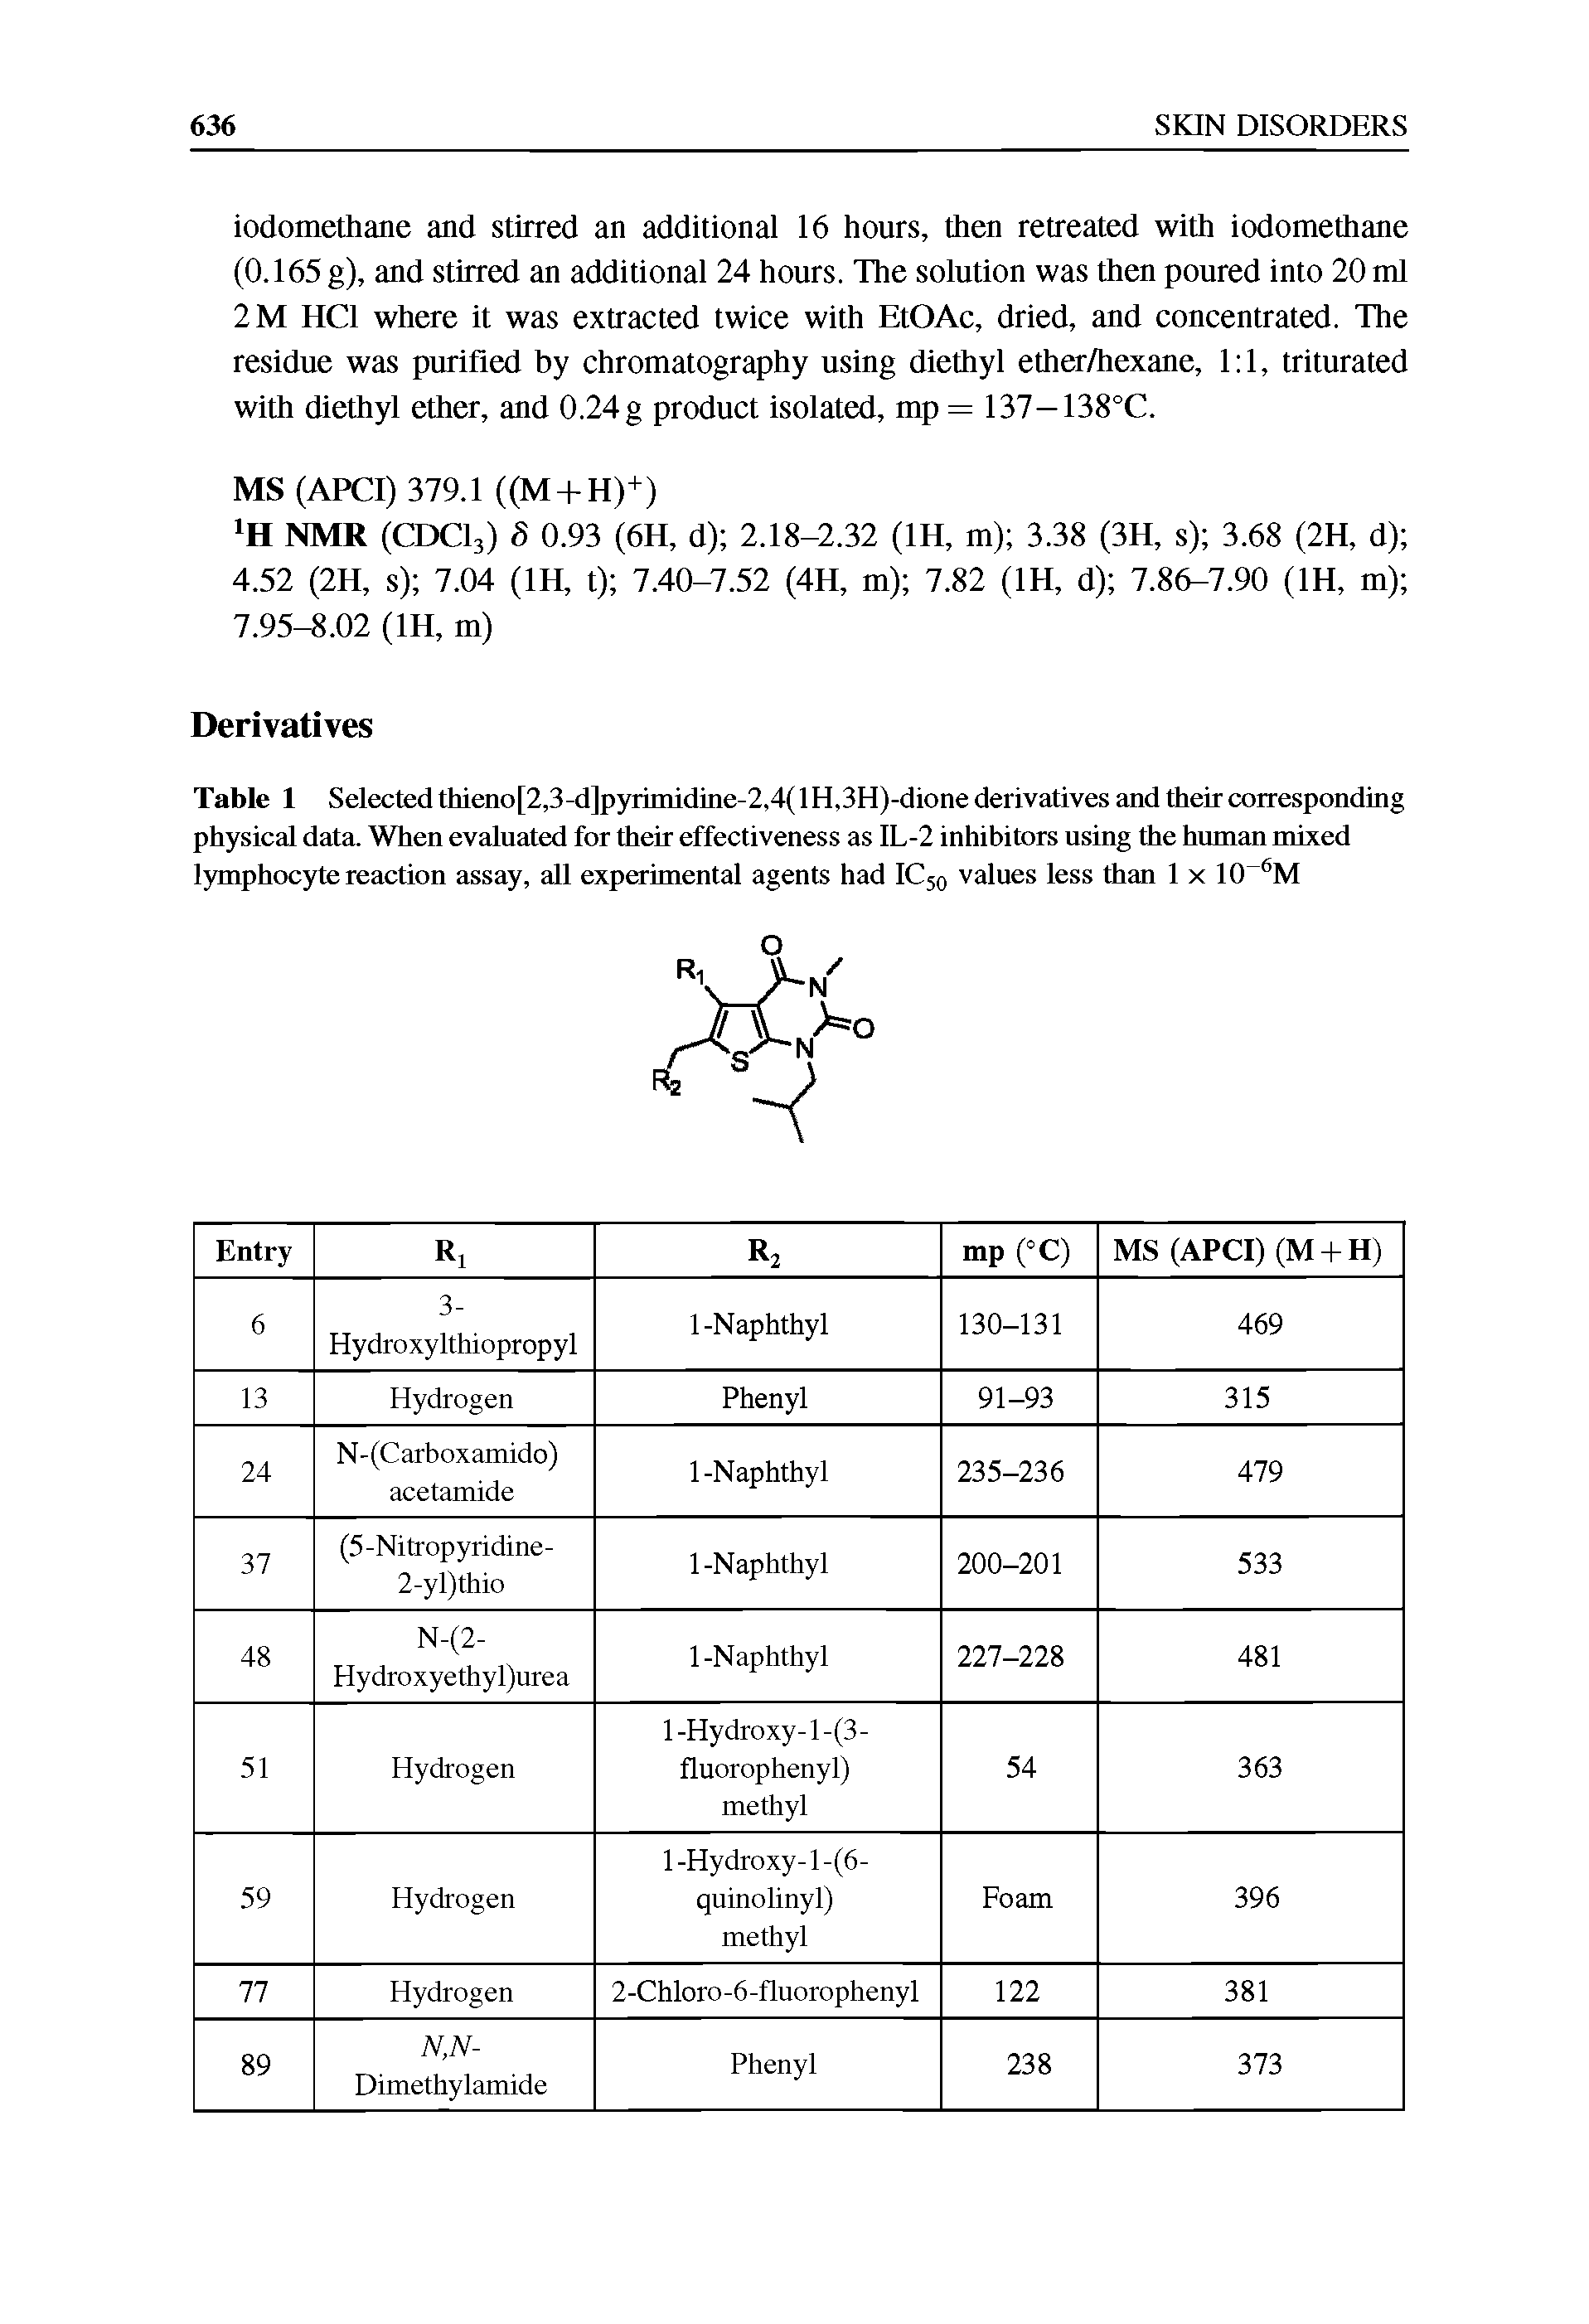 Table 1 Selected thieno[2,3-d]pyrimidine-2,4( 1 H,3H)-dione derivatives and their corresponding physical data. When evaluated for their effectiveness as IL-2 inhibitors using the human mixed lymphocyte reaction assay, all experimental agents had IC50 values less than 1 x 10 6M...